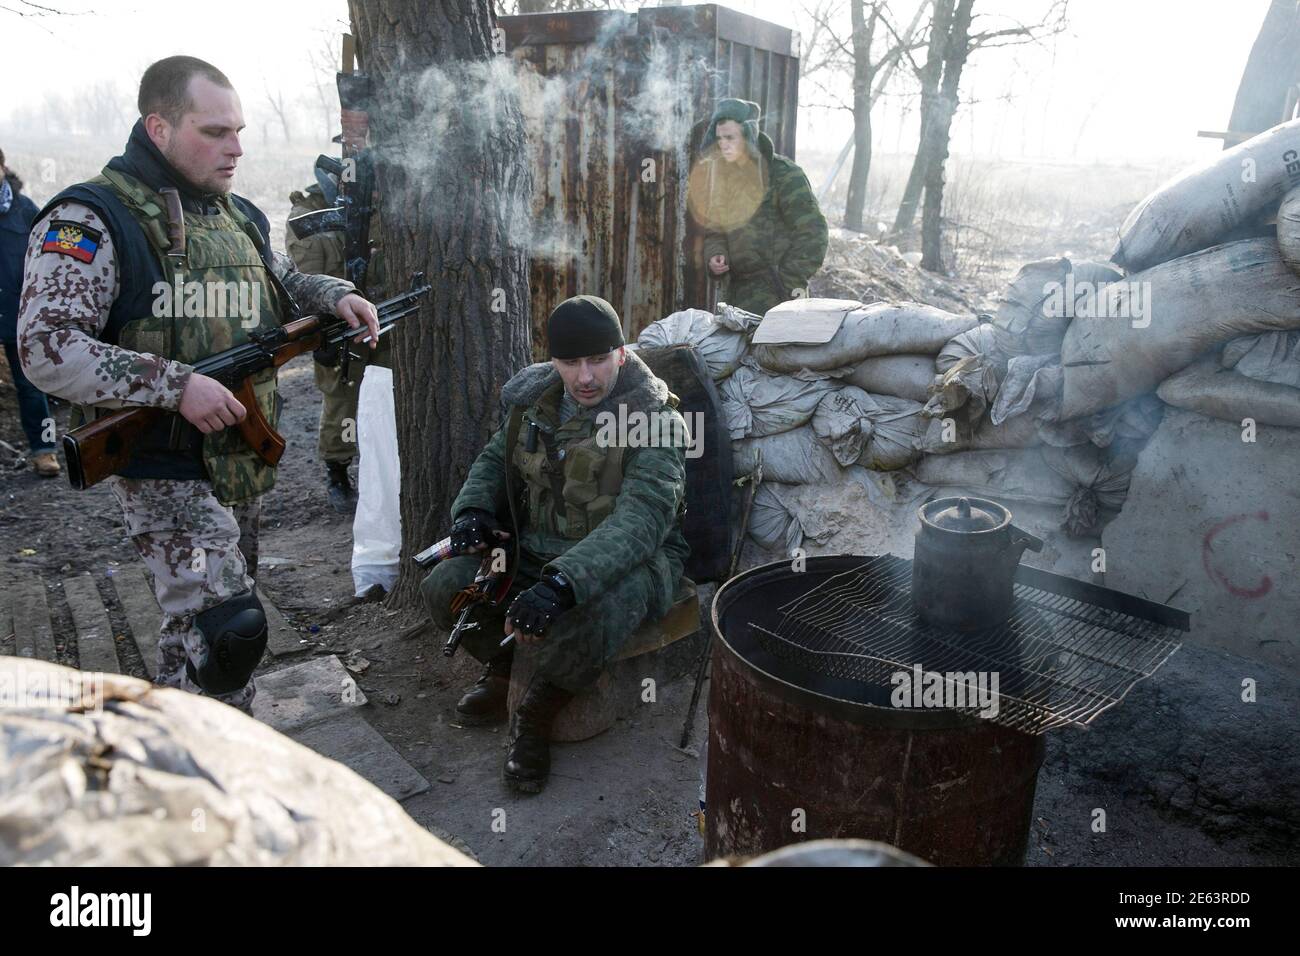 Members of the armed forces of the separatist self-proclaimed Donetsk People's Republic rest at a checkpoint near Donetsk, February 15, 2015. The Ukrainian military said on Sunday a ceasefire between government troops and pro-Russian separatists in east Ukraine is being observed 'in general' and that rebel attacks are infrequent and not widespread .REUTERS/Baz Ratner (UKRAINE - Tags: CIVIL UNREST MILITARY POLITICS CONFLICT) Stock Photo